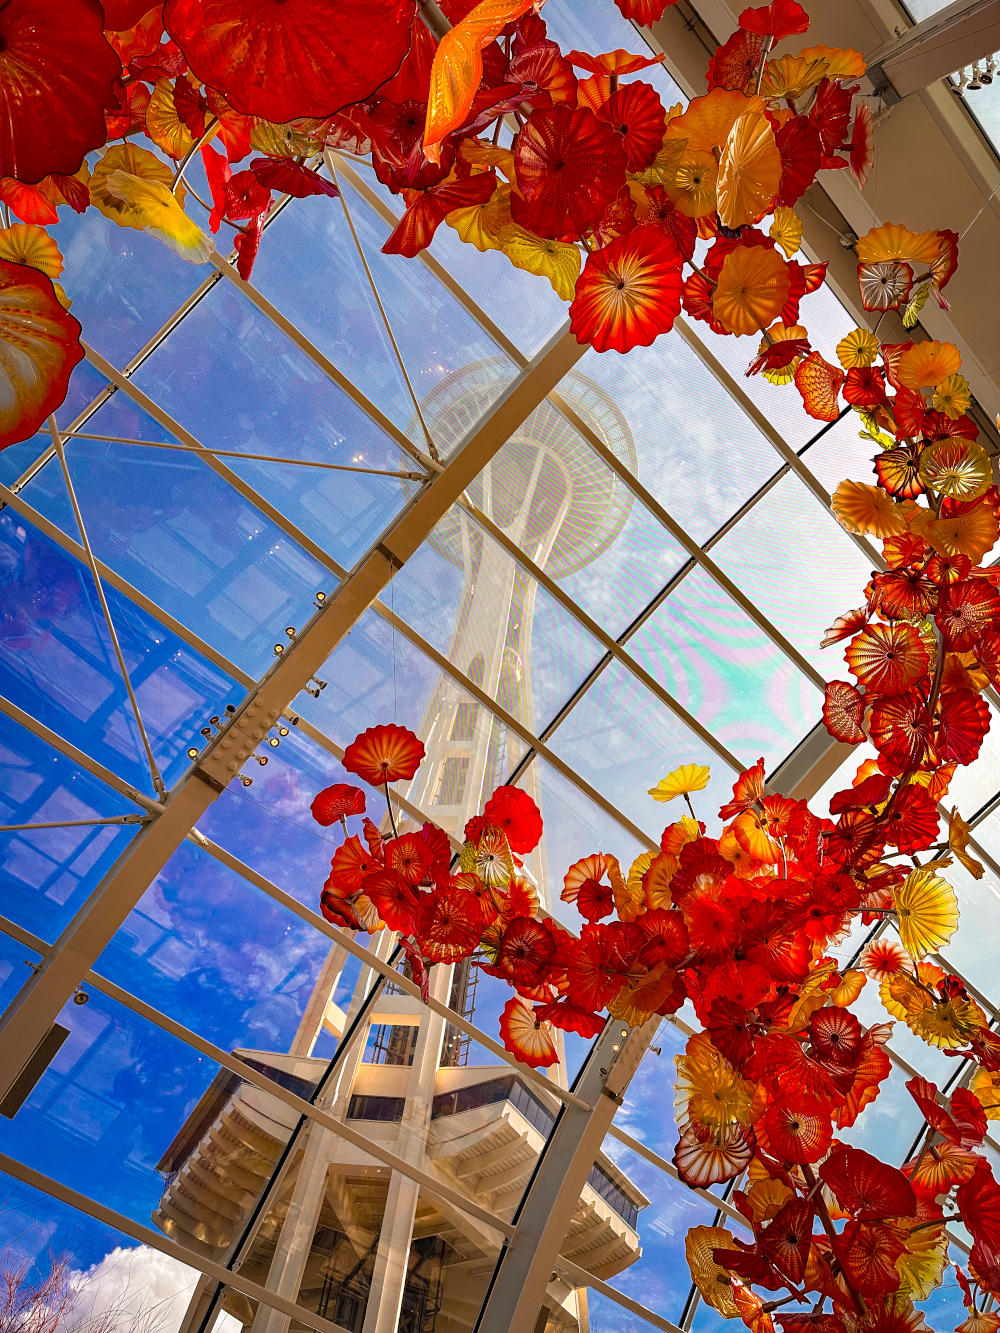 Space Needle seen through spray of glass flowers in Chihuly Garden